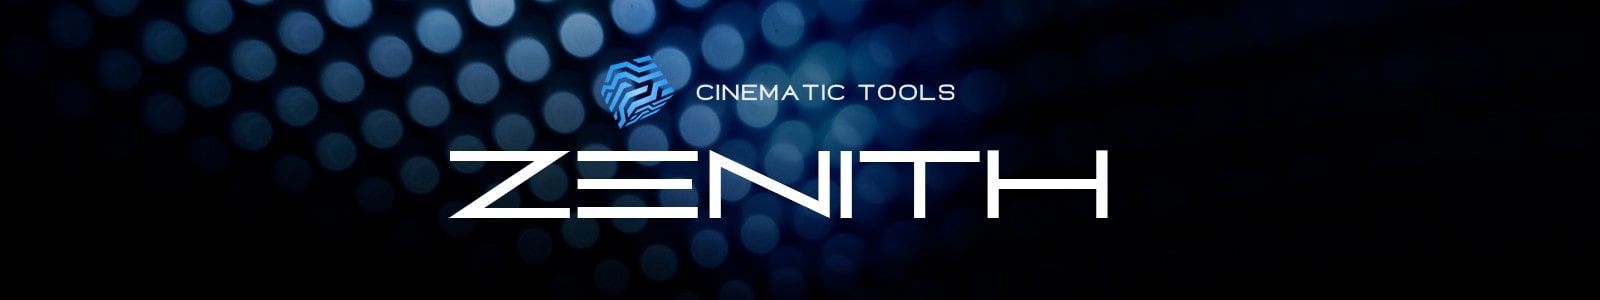 ZENITH by Cinematic Tools